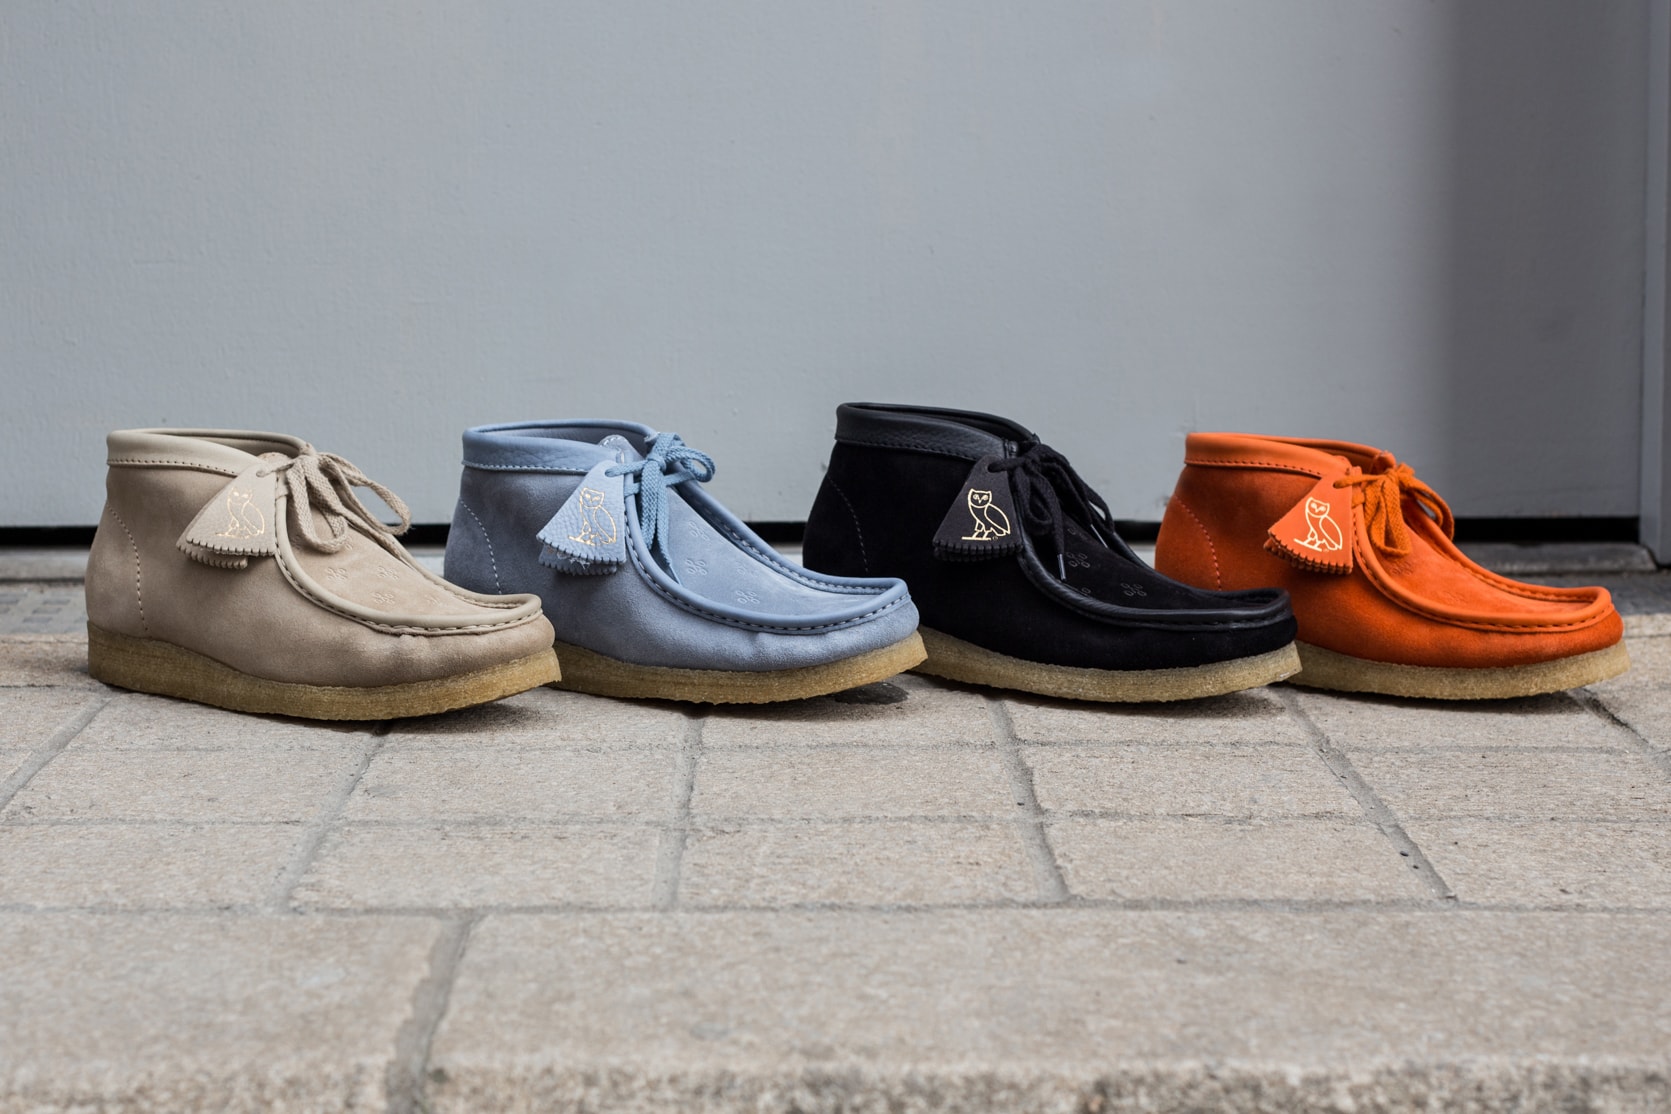 The second OVO x Clarks shoe is here